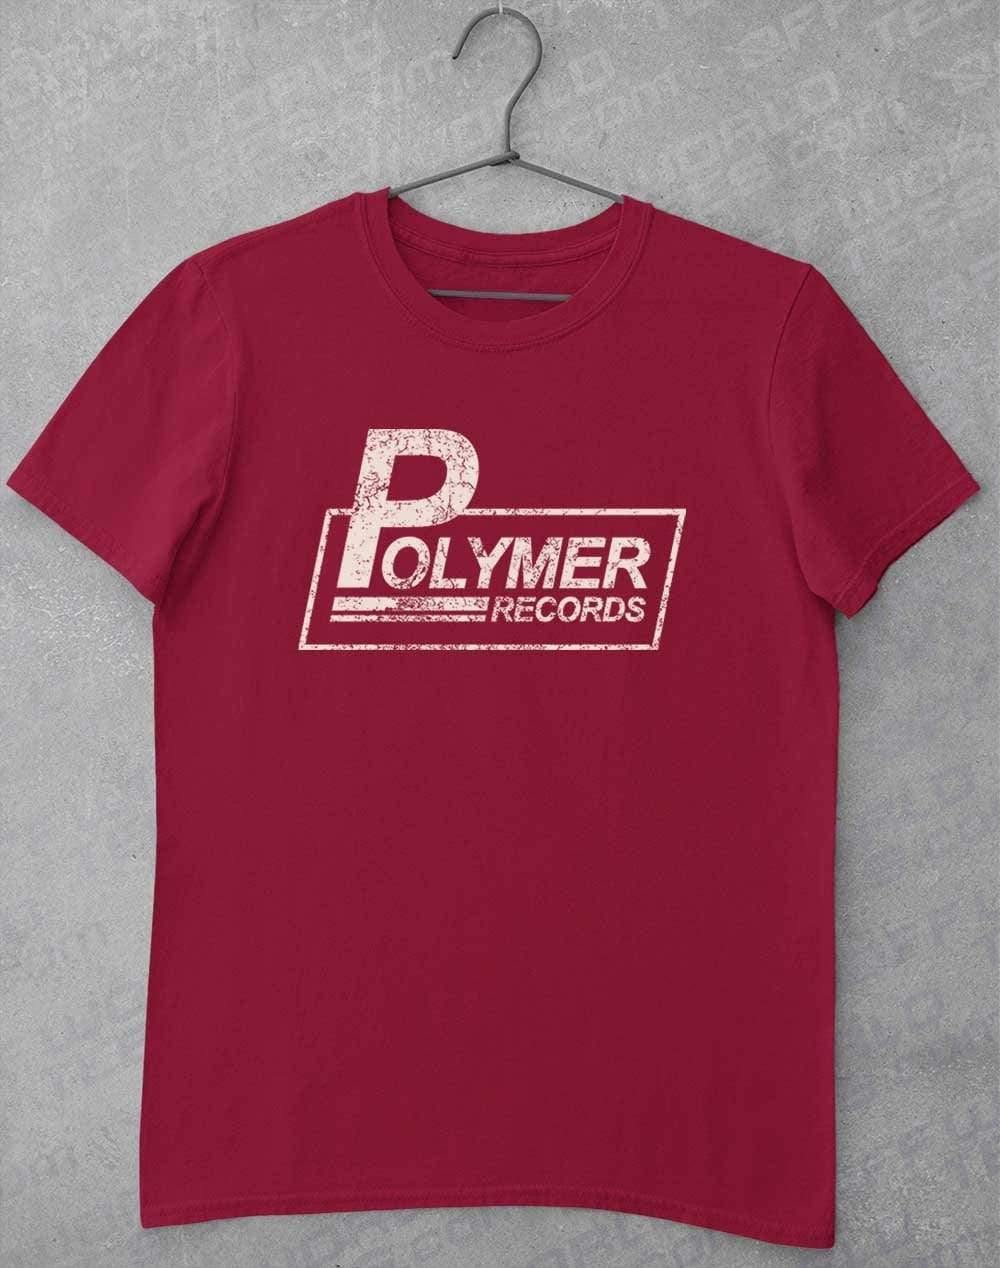 Polymer Records Distressed Logo T-Shirt S / Cardinal Red  - Off World Tees